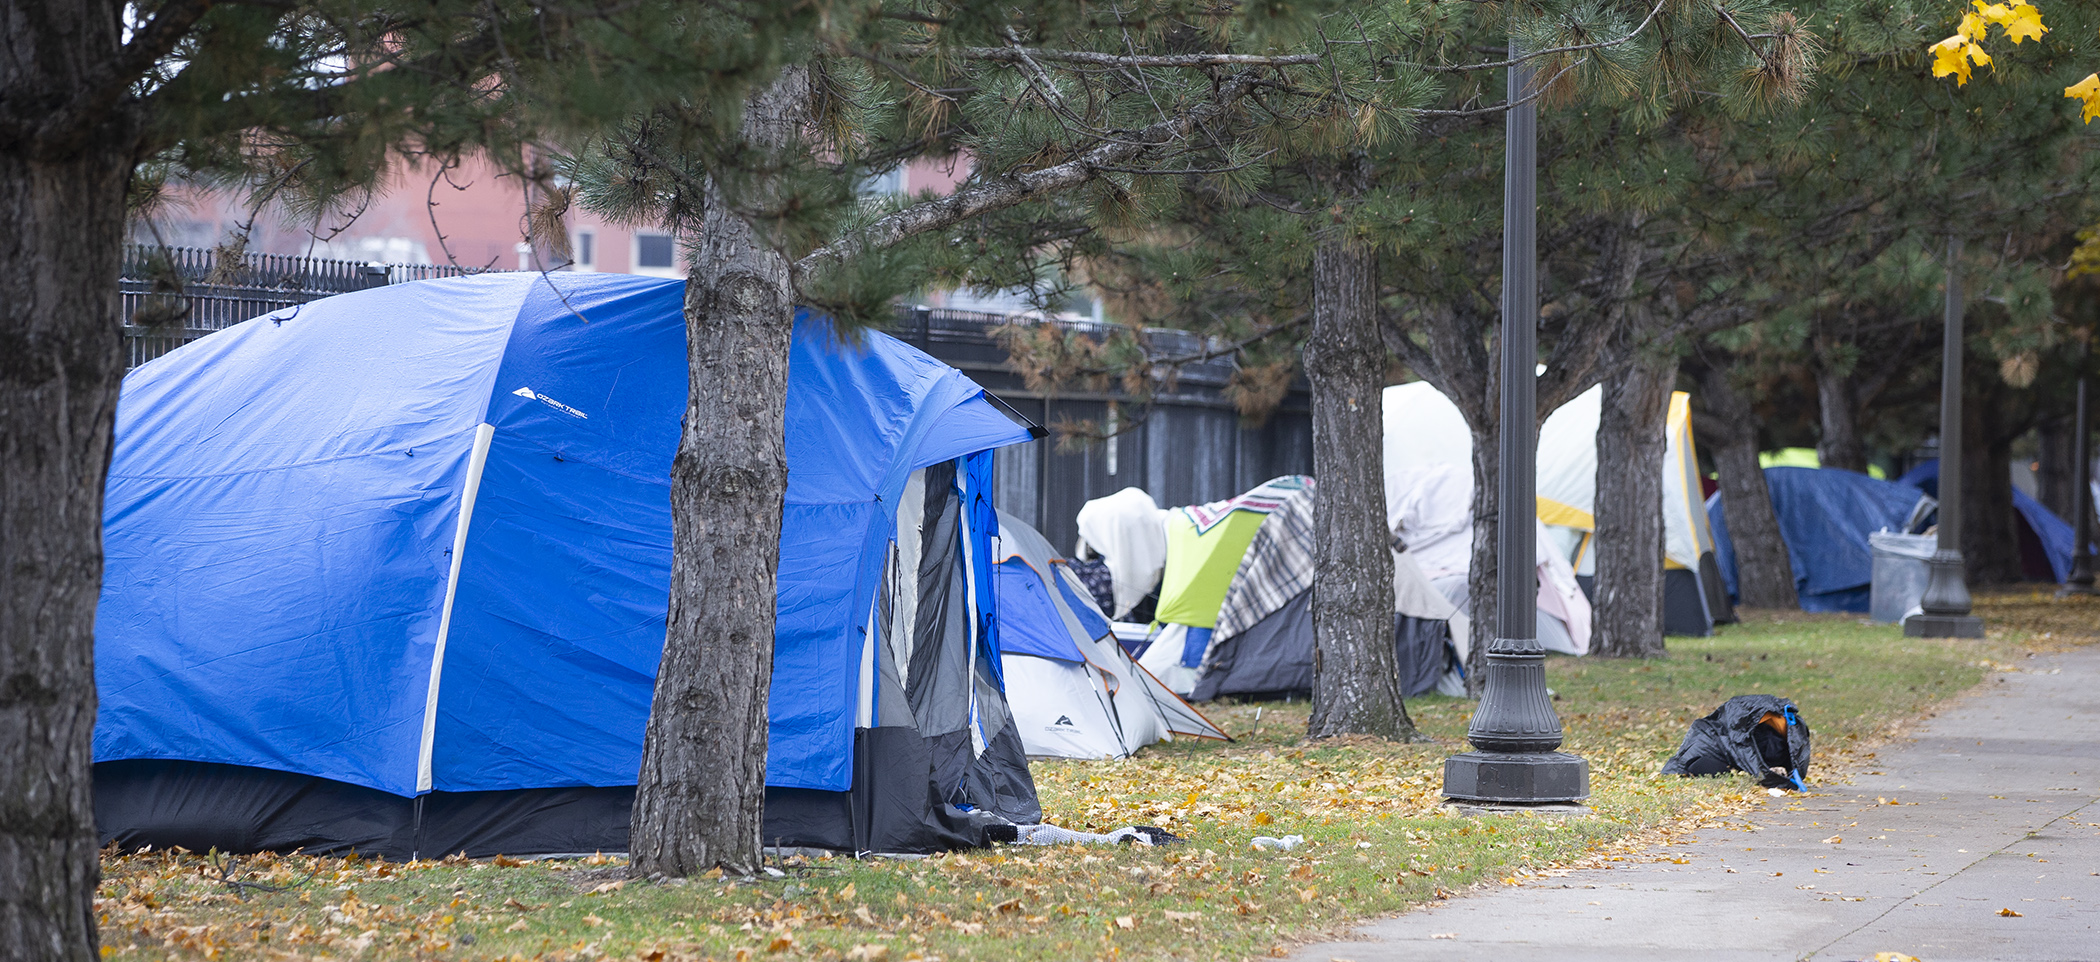 The House Preventing Homelessness Division approved two bills that would provide a combined $42.5 million to shelters and service programs. House Photography file photo